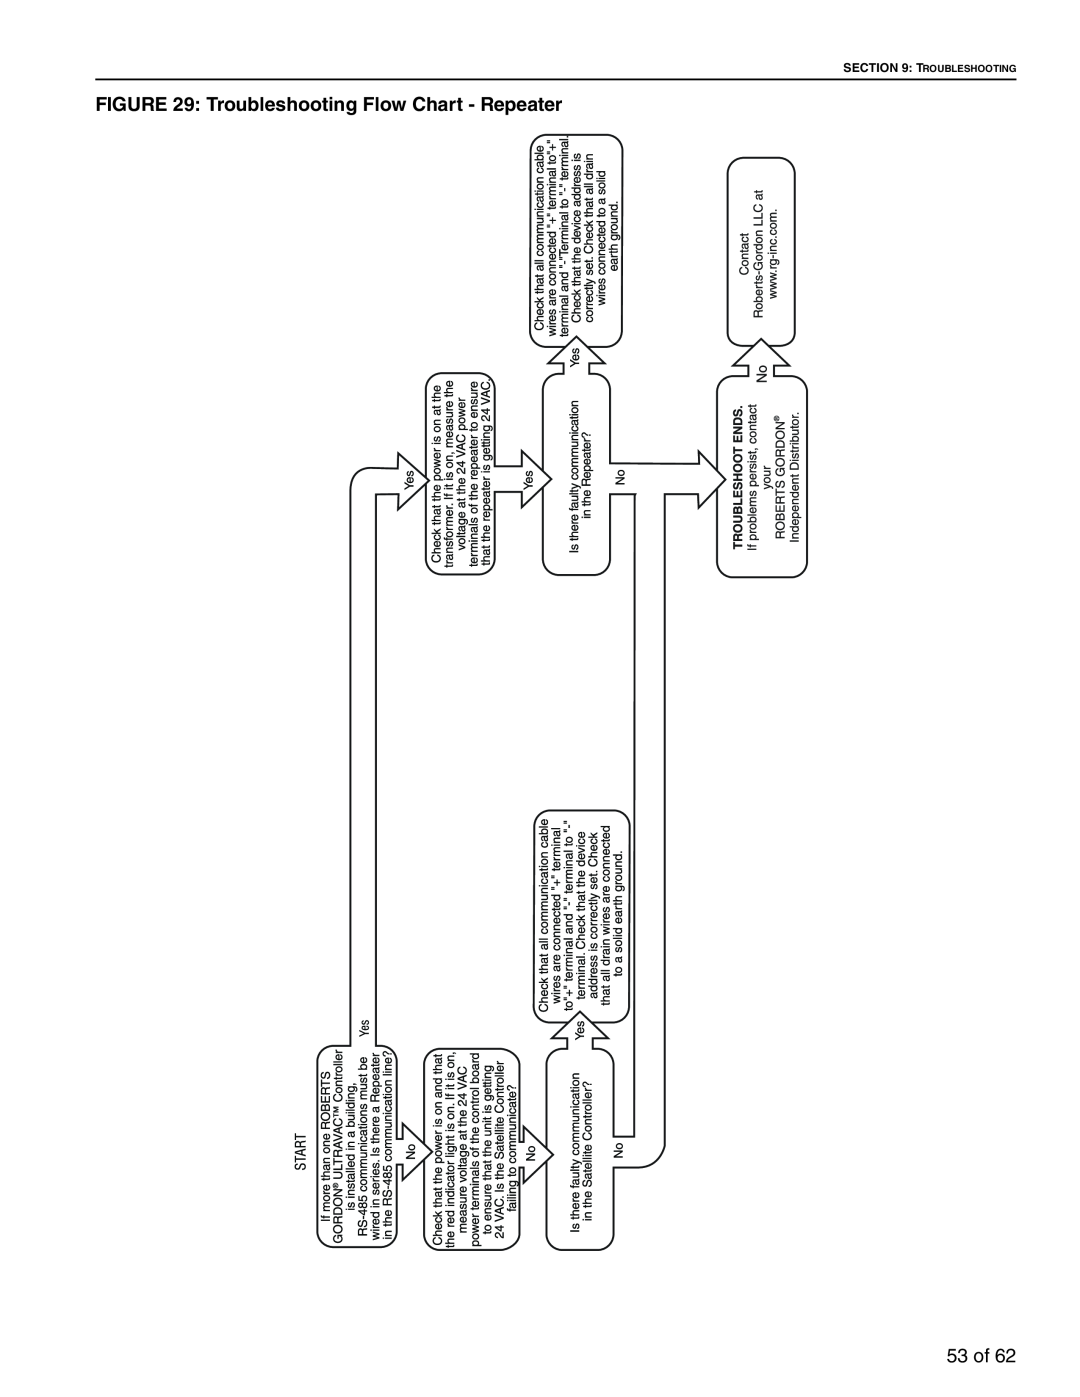 Roberts Gorden 10081601NA Rev H 12/11 service manual Troubleshooting Flow Chart - Repeater, 53 of 